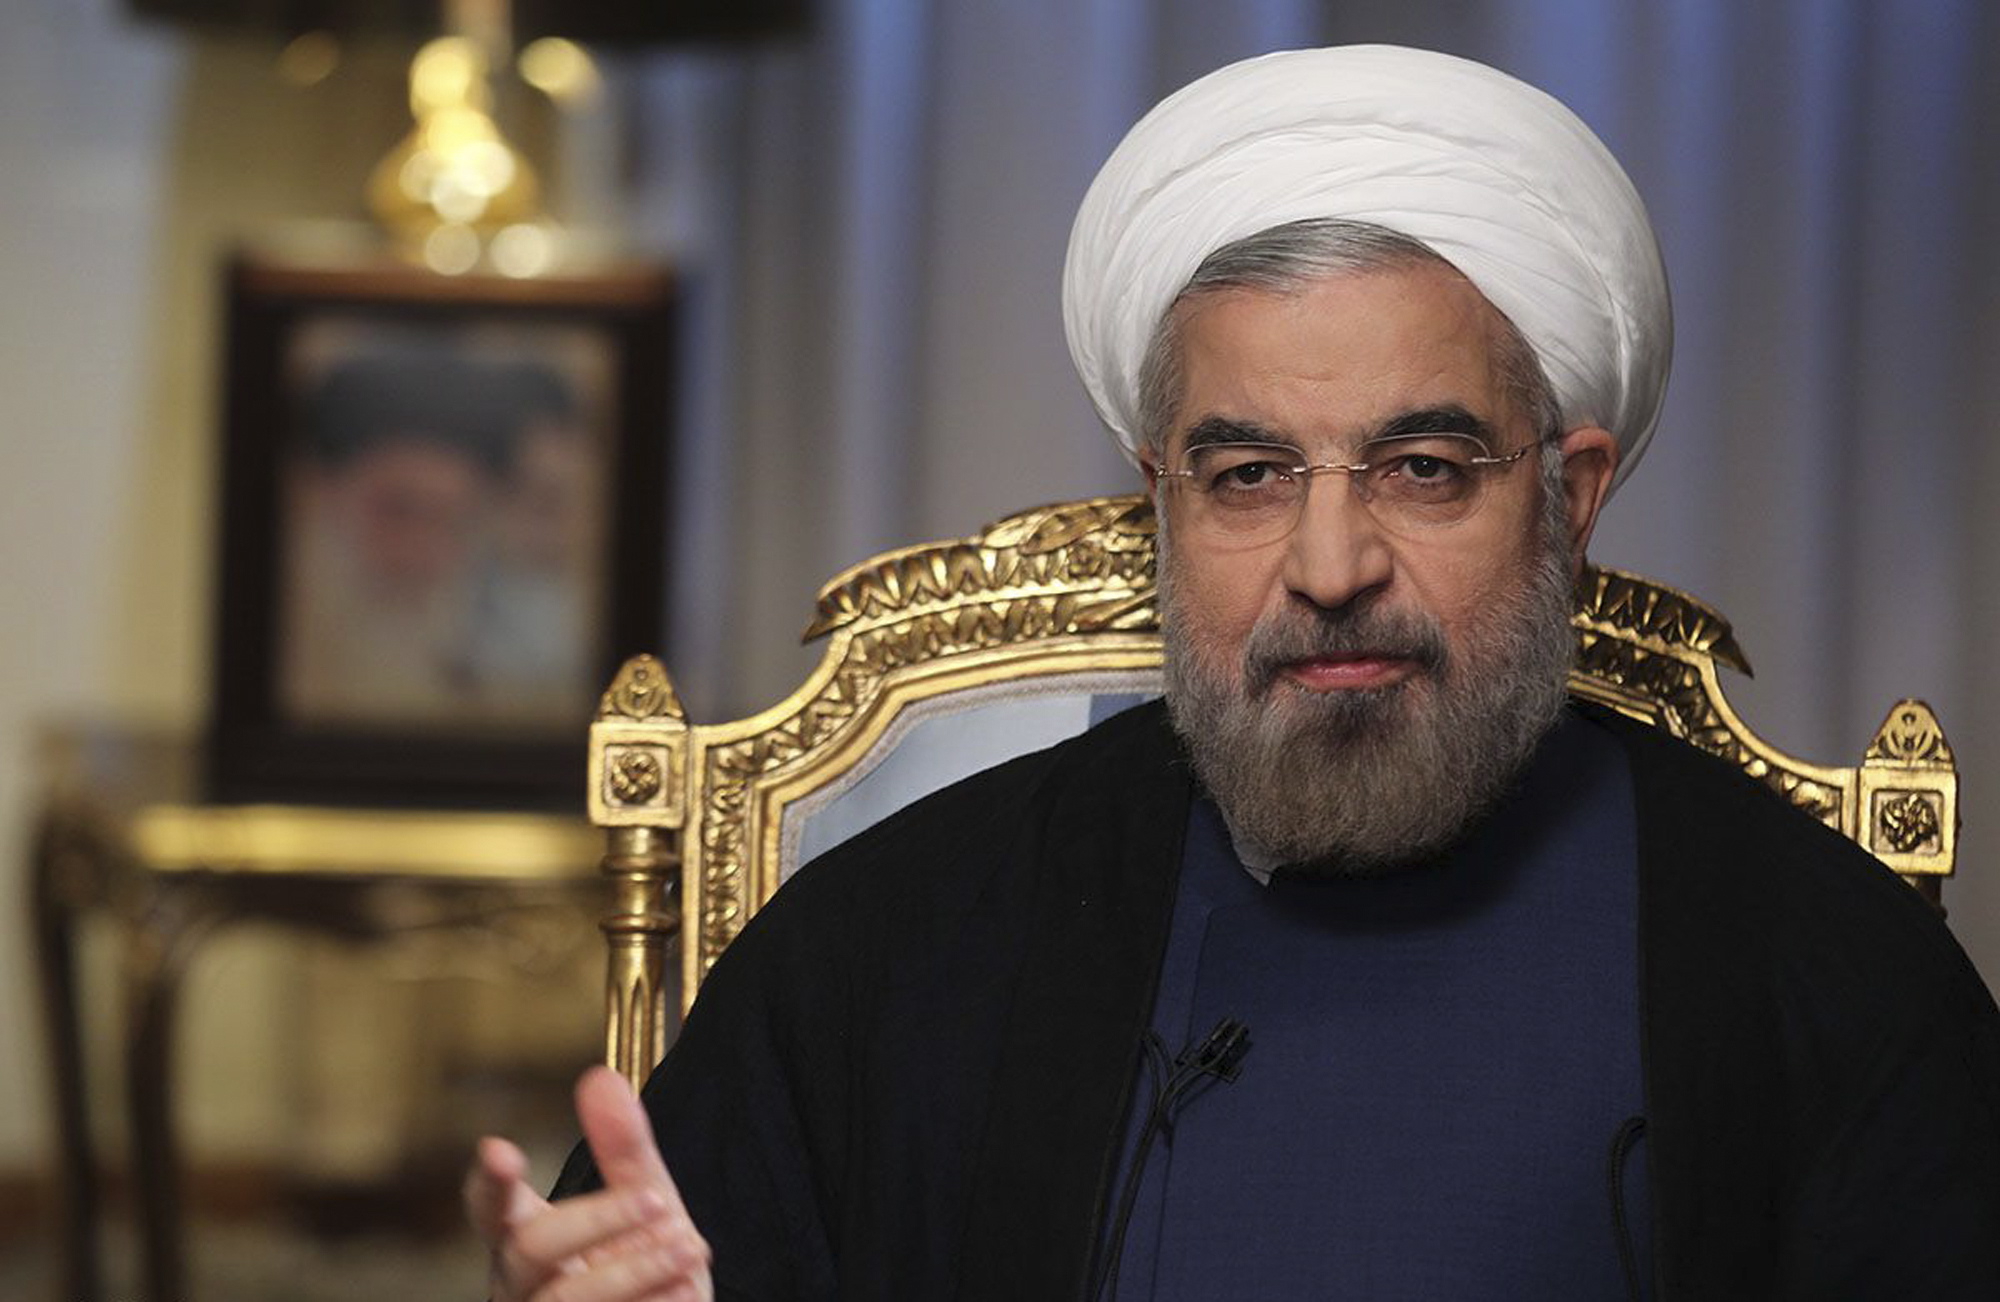 Iranian President Hasan Rouhani speaks during an interview with state television at the presidency in Tehran, Iran.